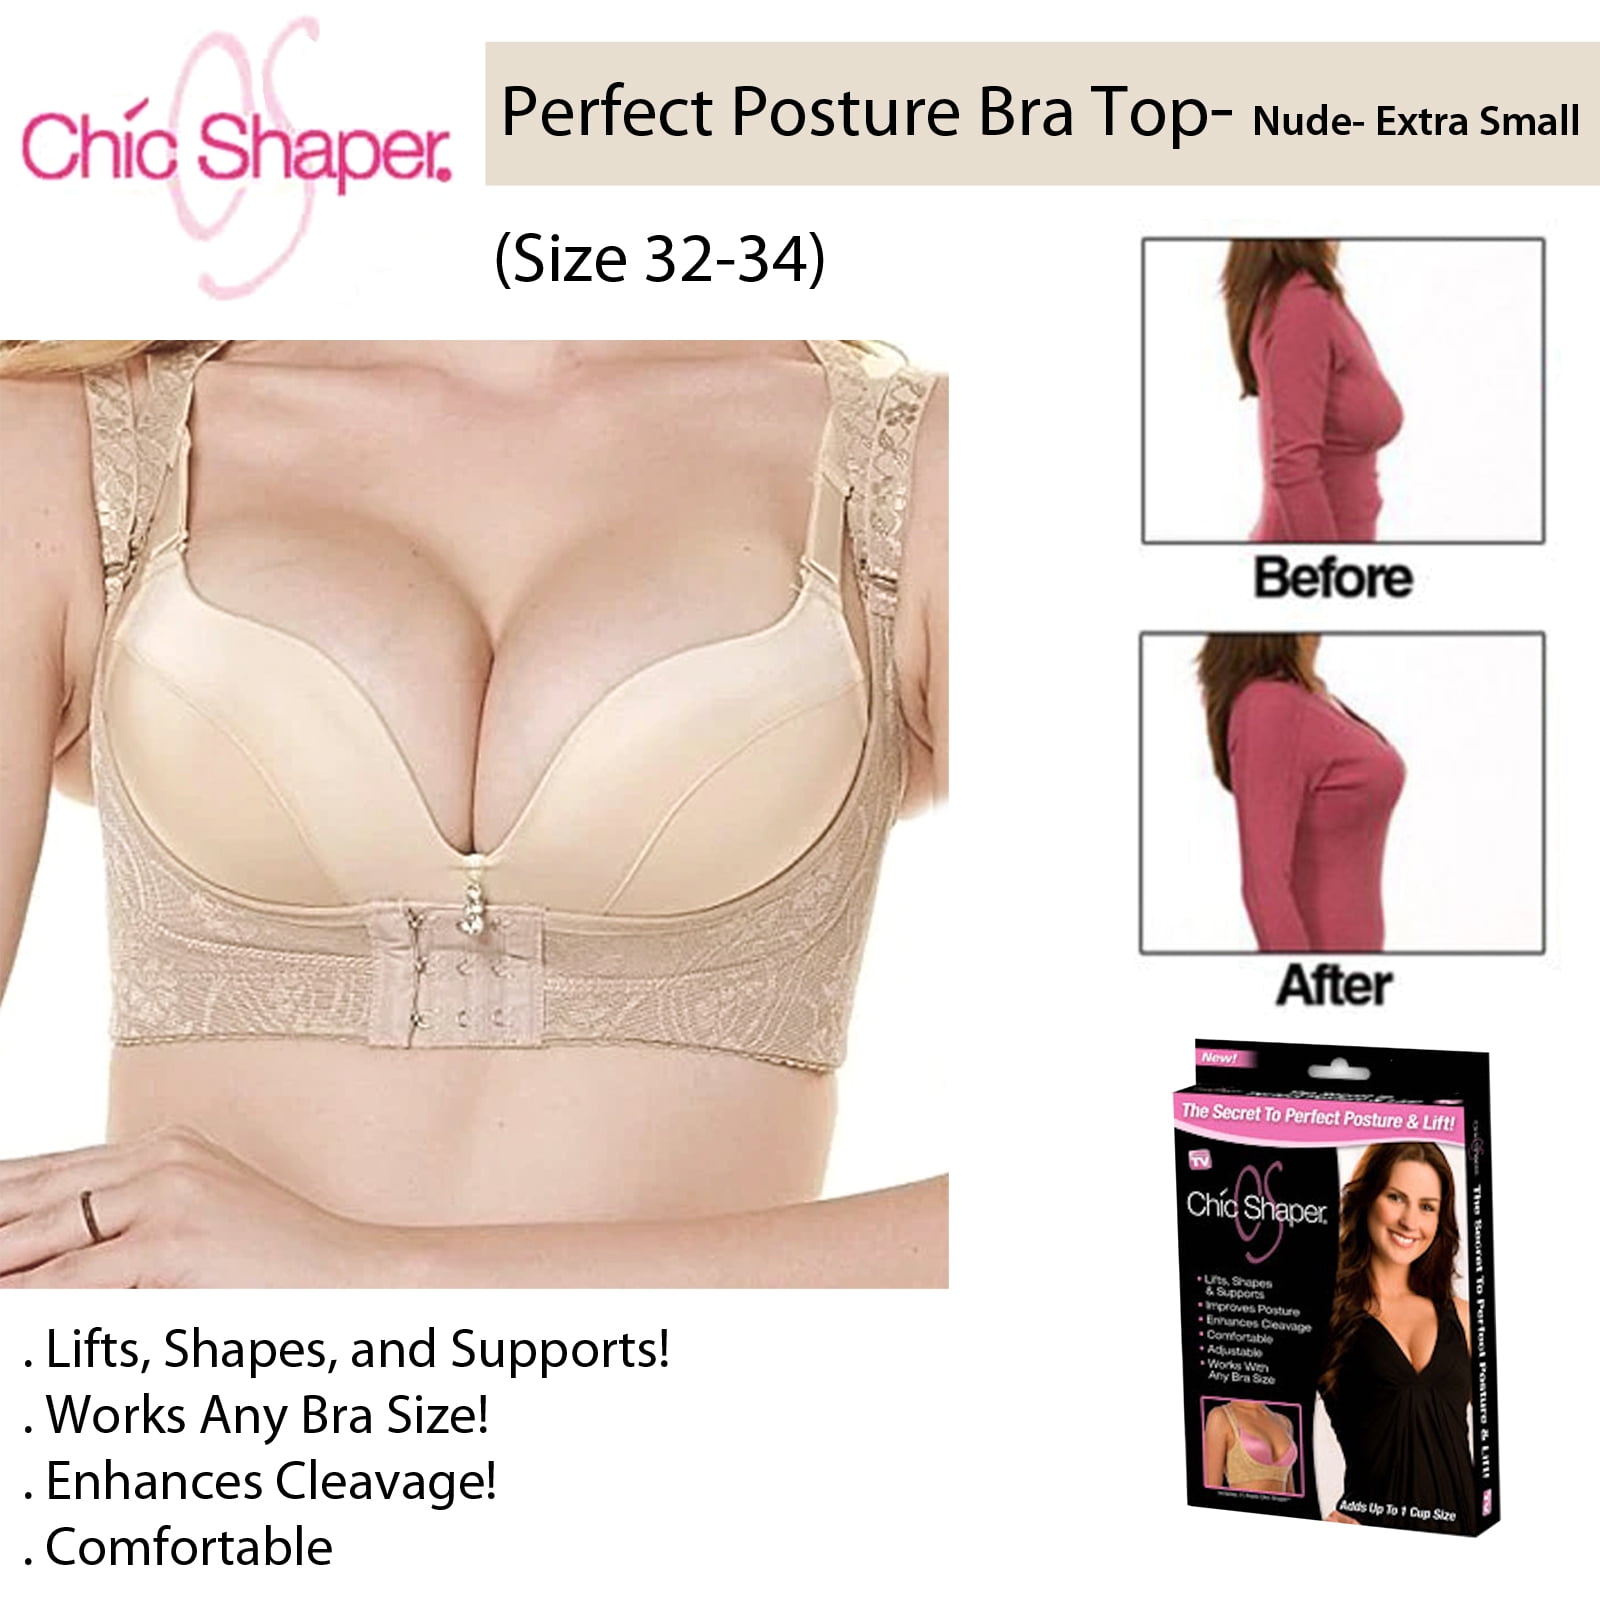 Chic Shaper Best Perfect Posture Support Bra for Women Top-Nude